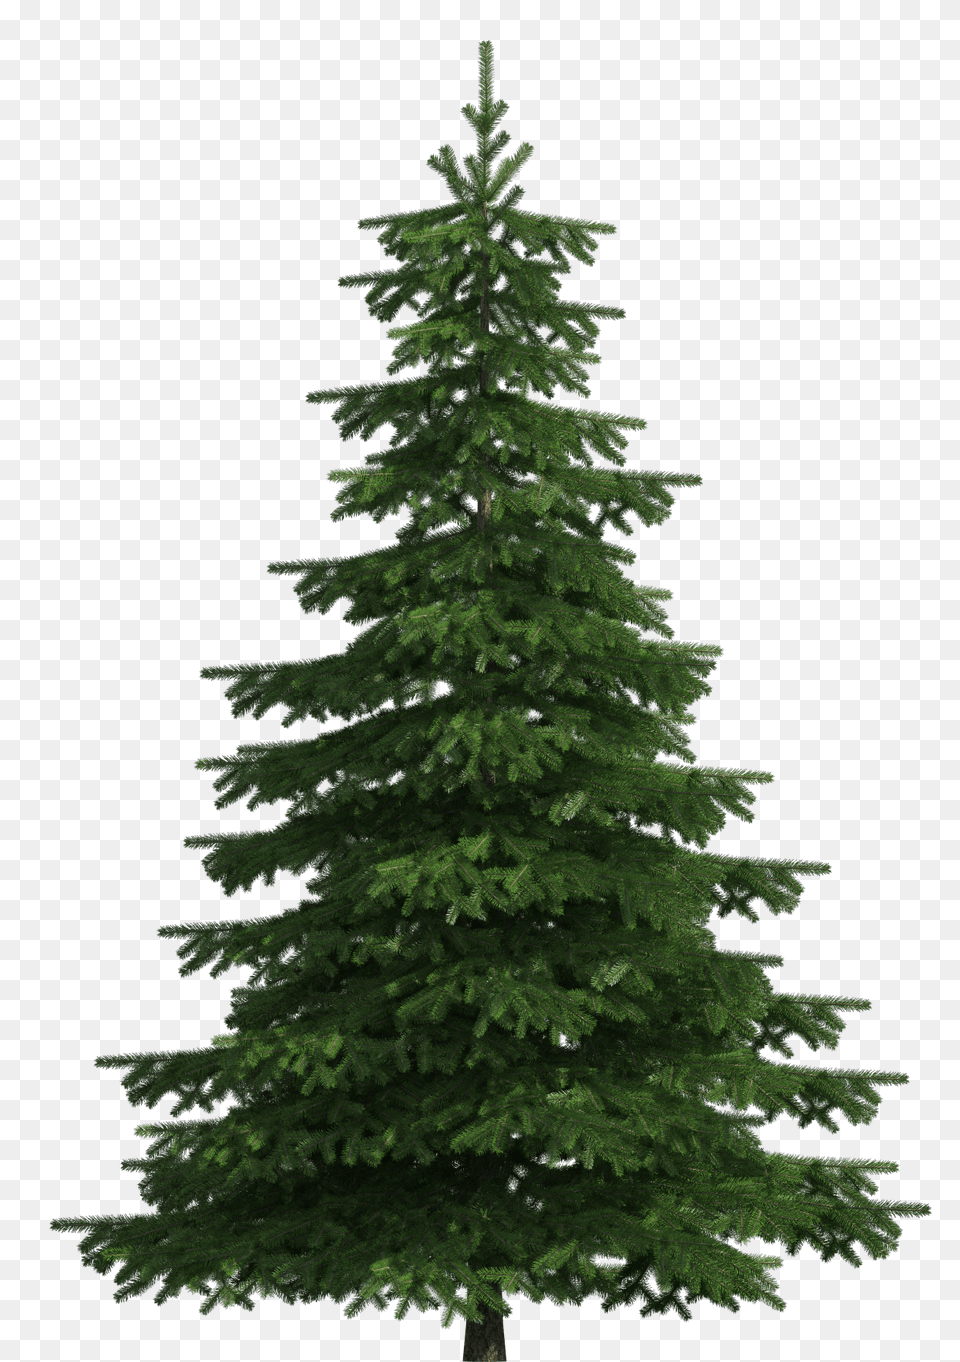 Realistic Pine Tree Clip Art Pine Tree, Conifer, Fir, Plant, Spruce Png Image